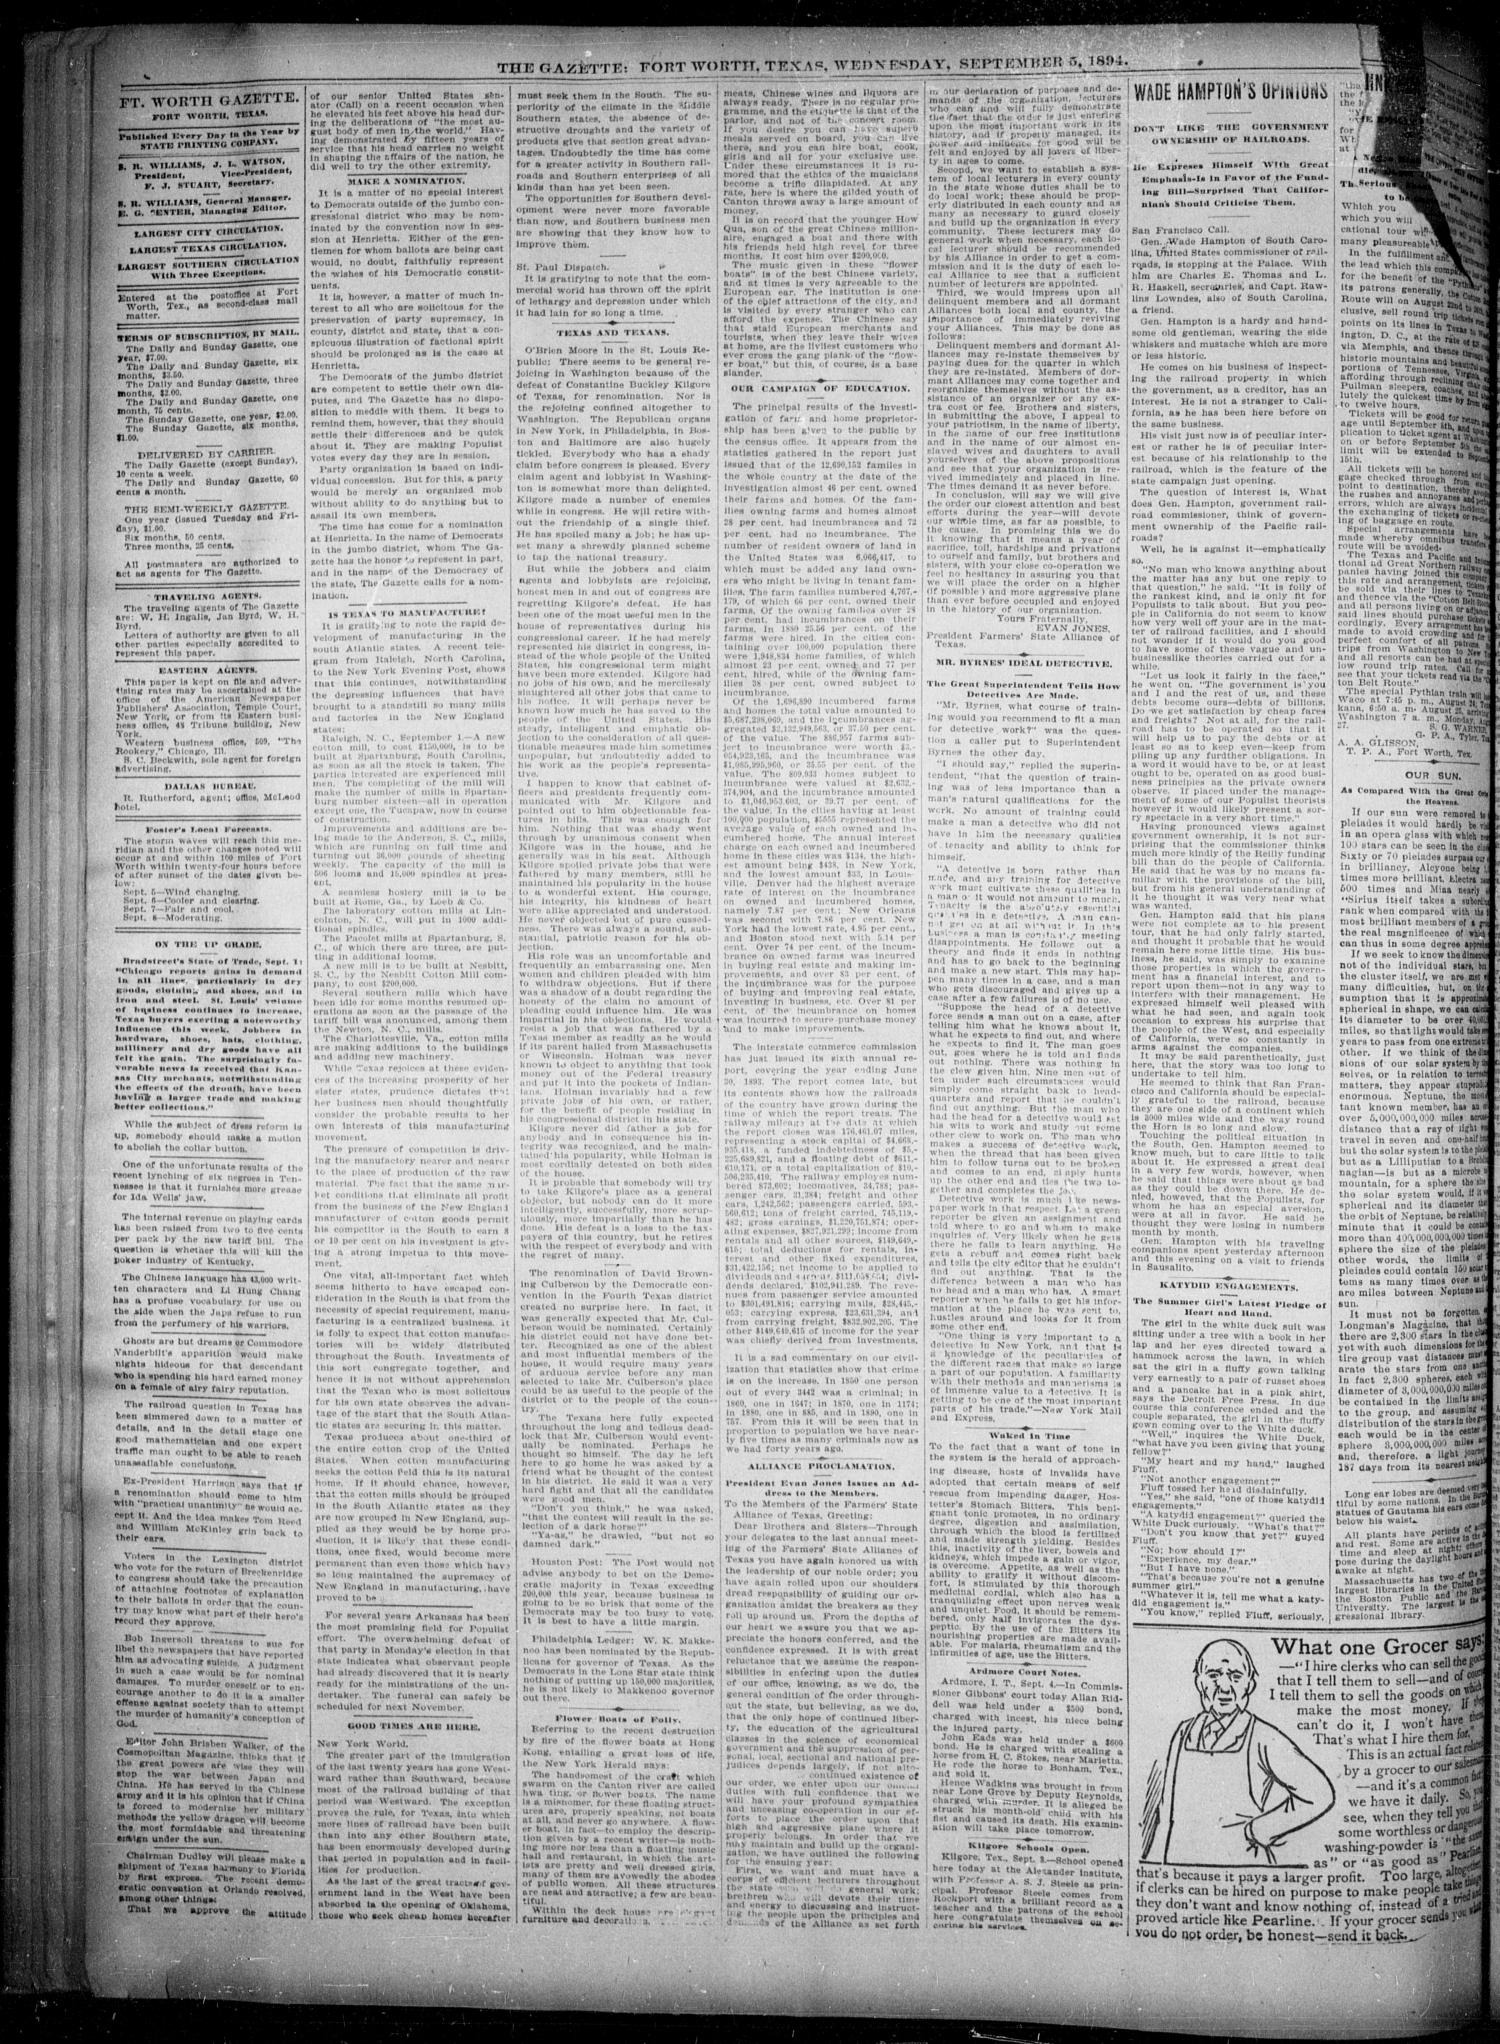 Fort Worth Gazette. (Fort Worth, Tex.), Vol. 18, No. 286, Ed. 1, Wednesday, September 5, 1894
                                                
                                                    [Sequence #]: 4 of 8
                                                